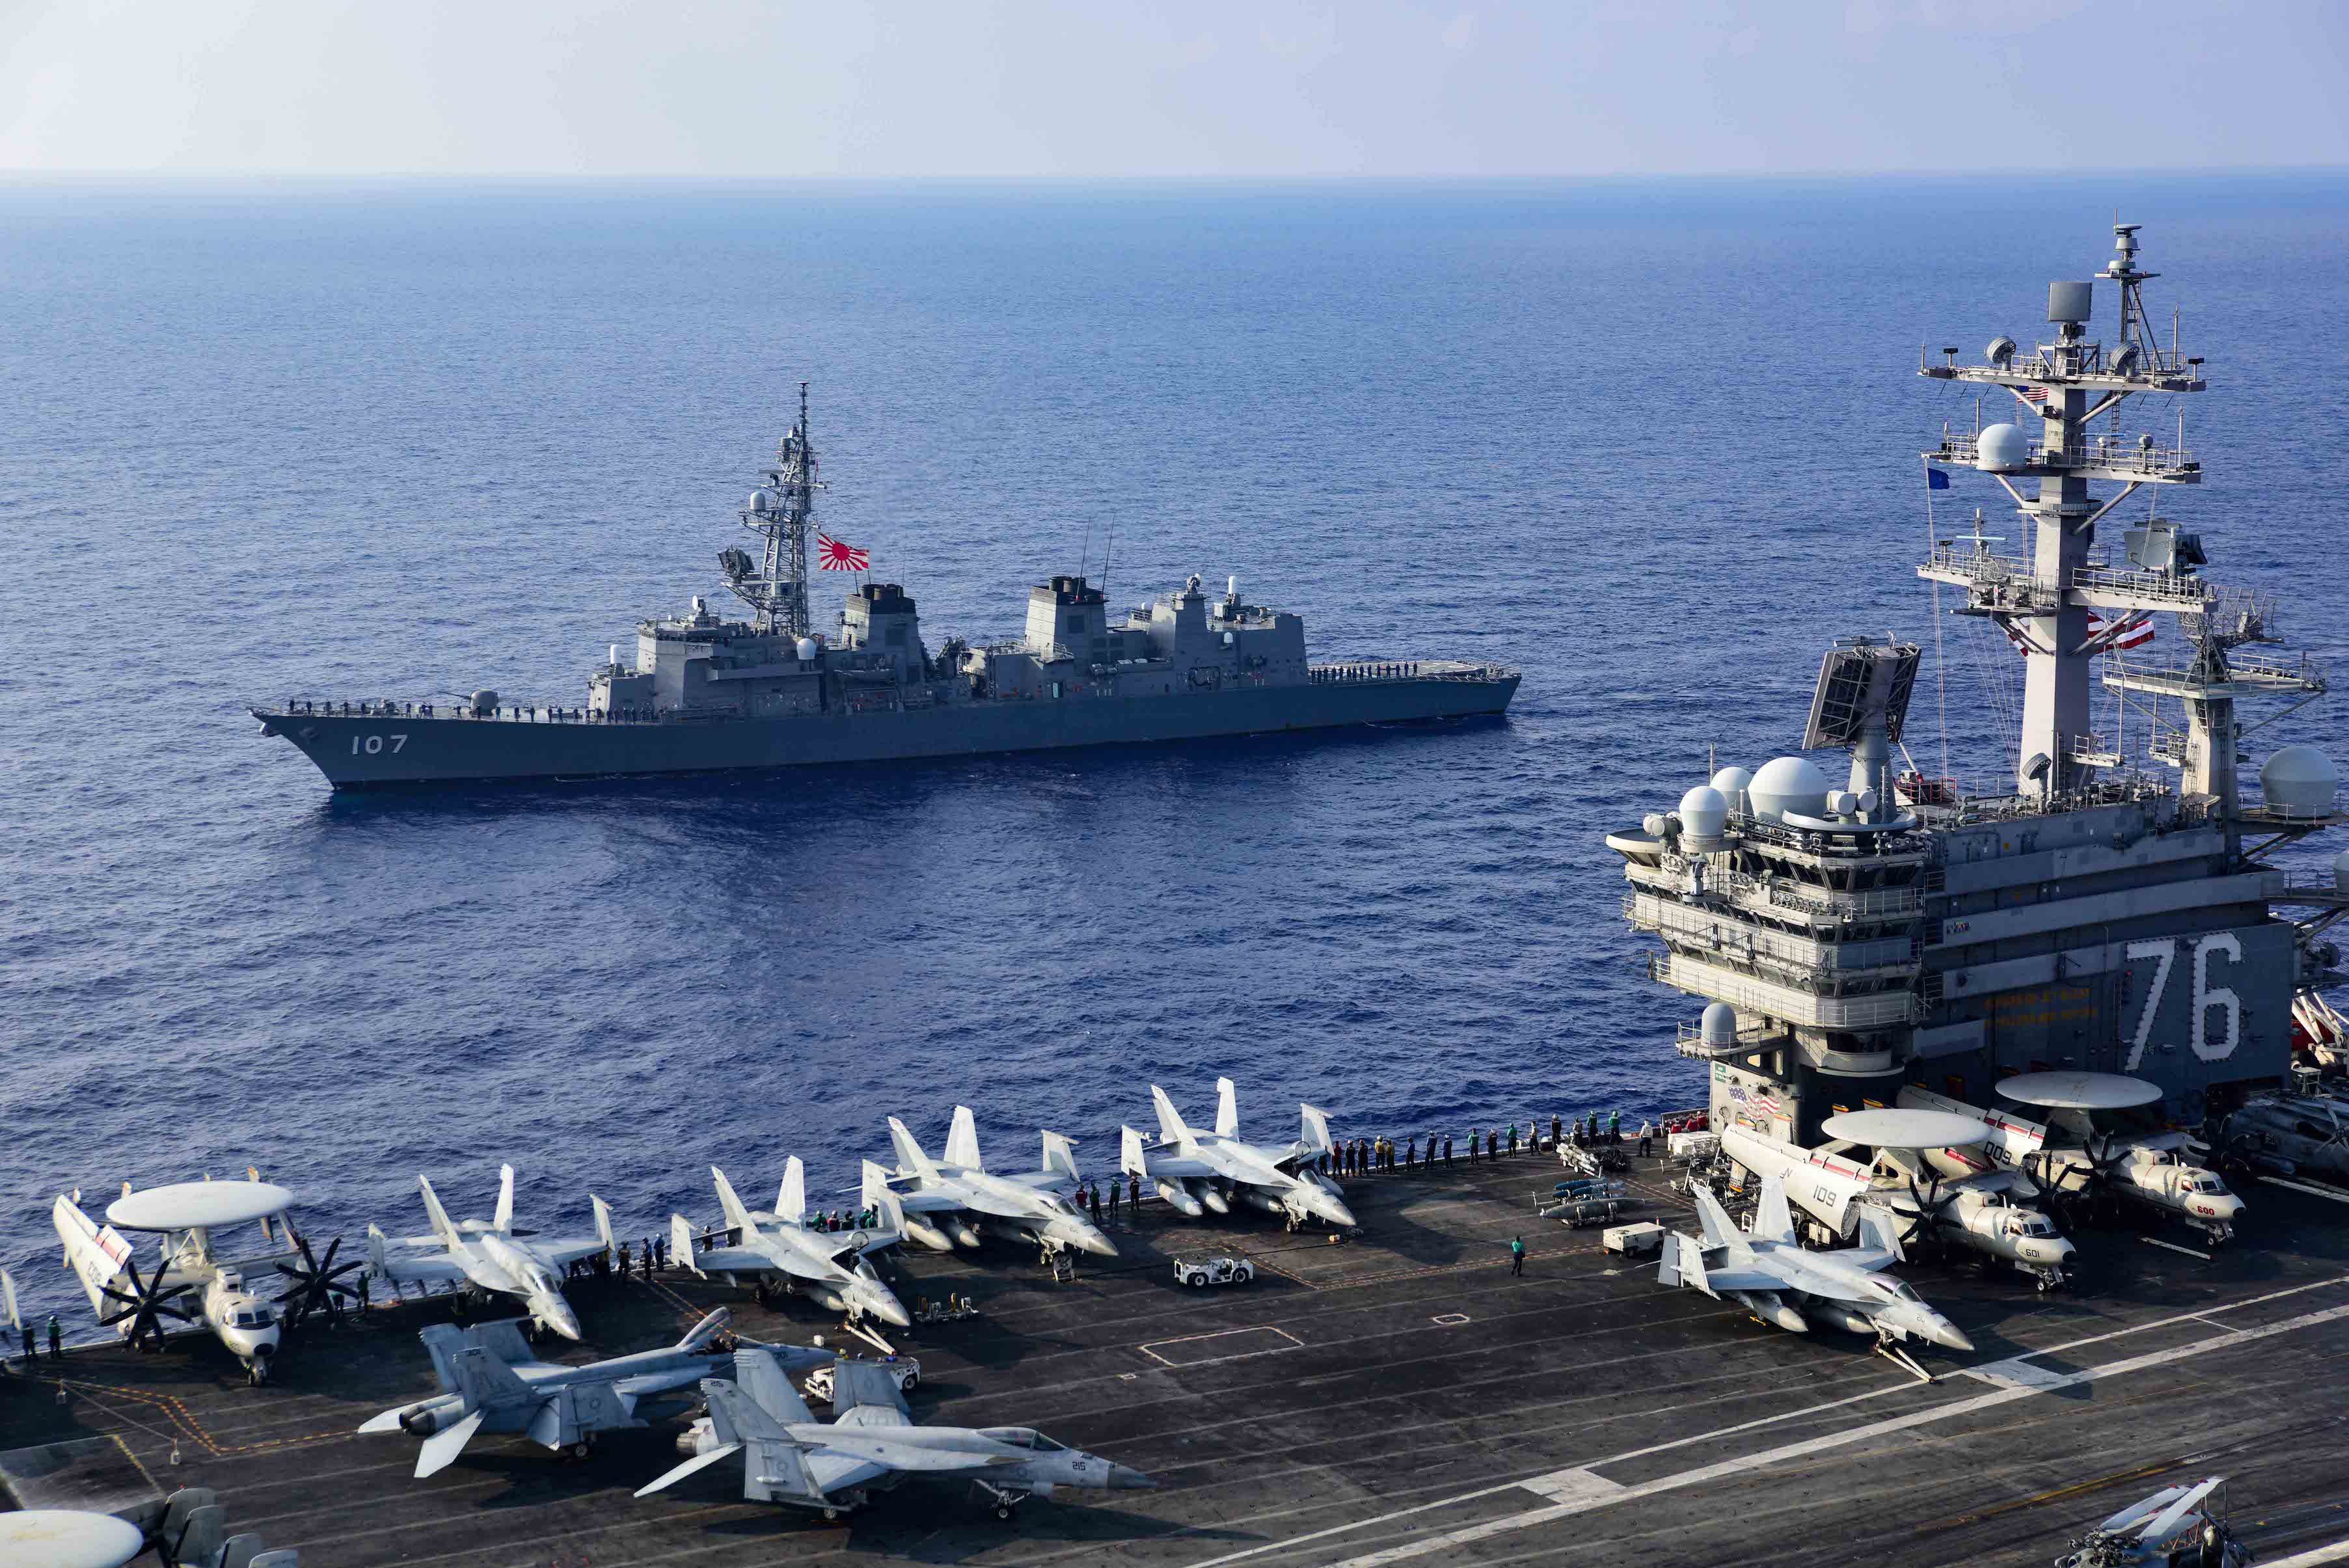 South China Sea: After all its posturing, the US is struggling to build a coalition against China